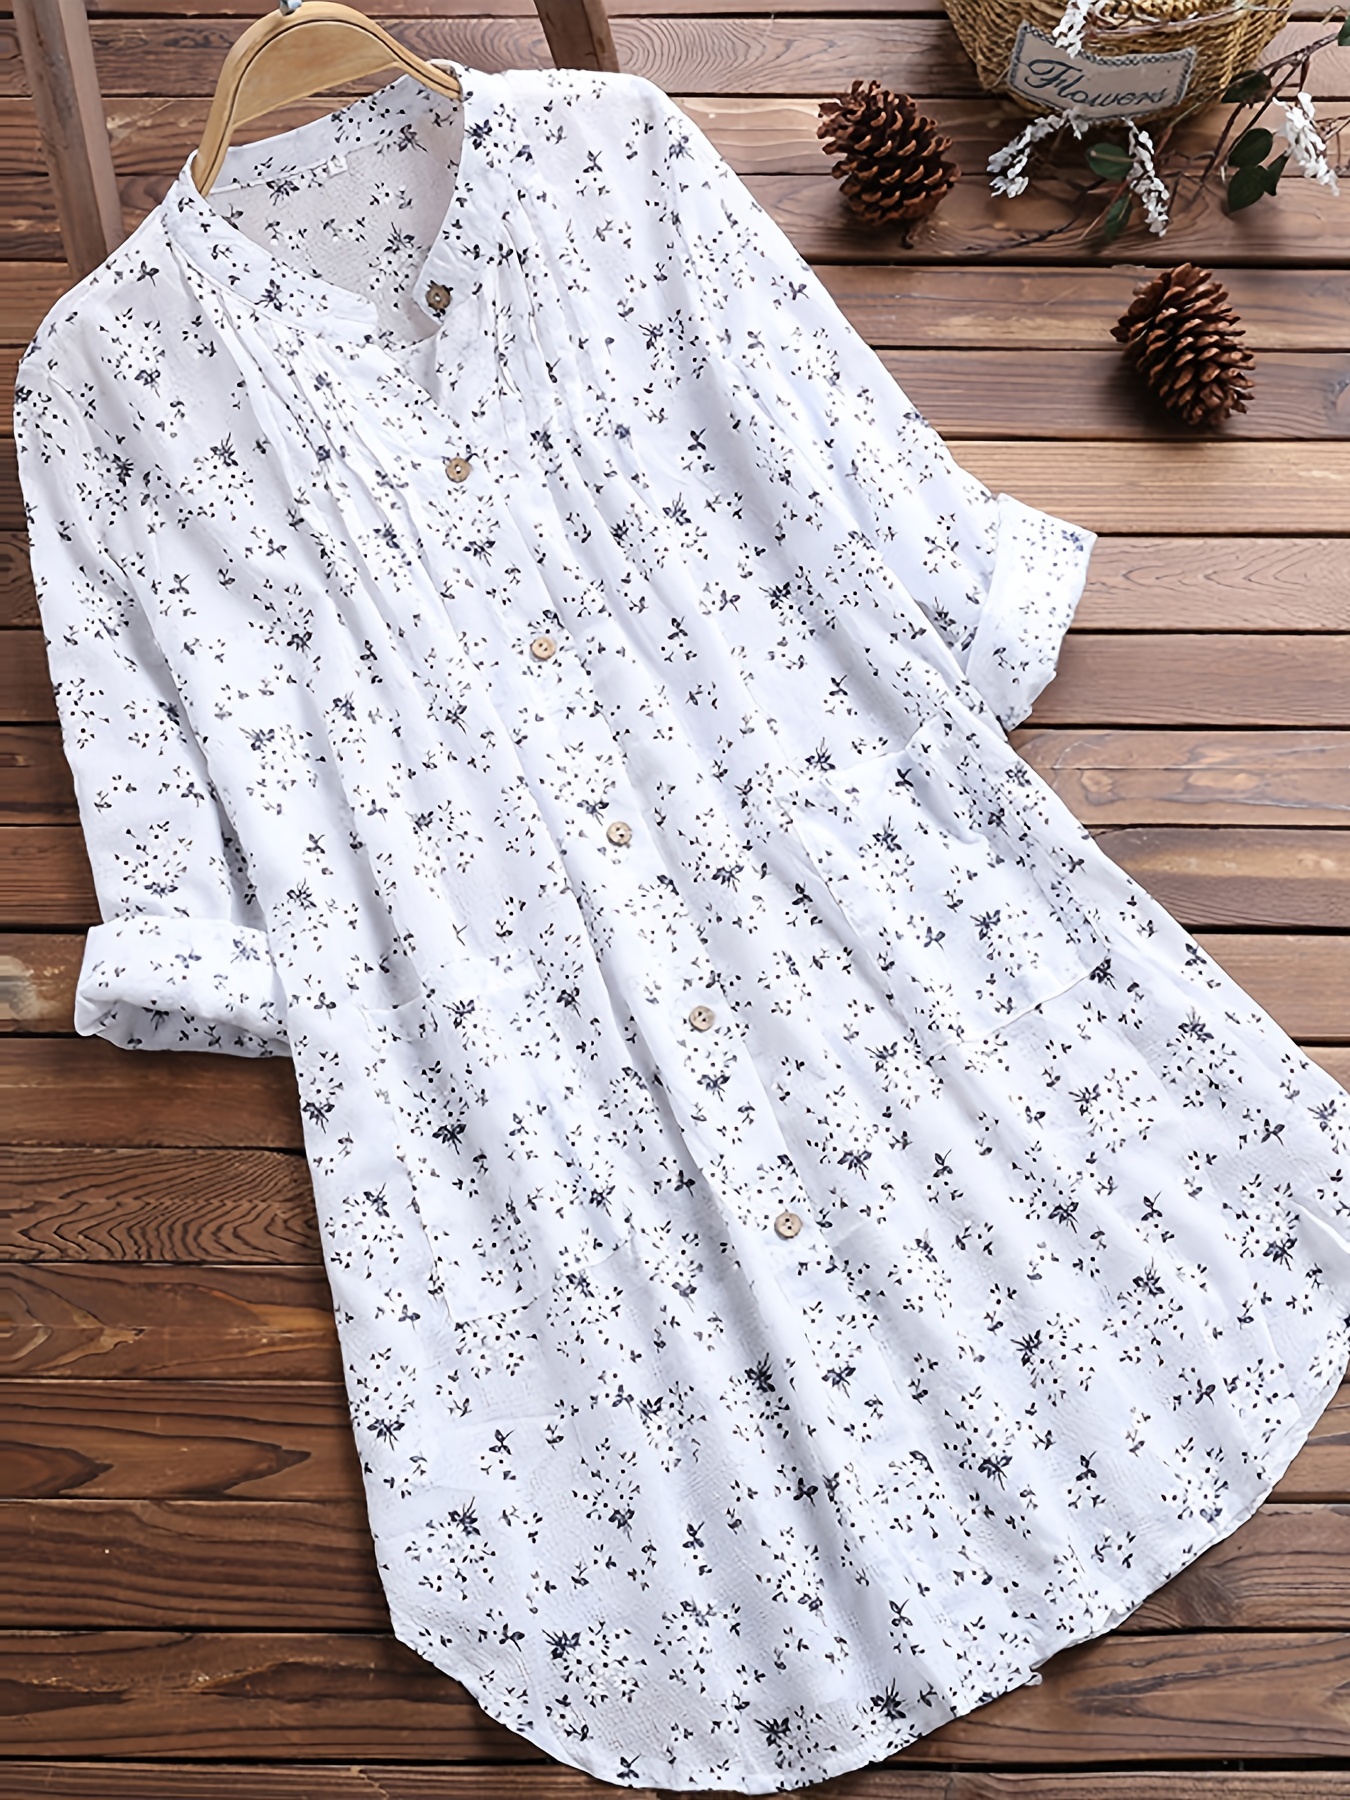 floral print pleated v neck long blouses, floral print pleated v neck long blouses casual loose button down long sleeve fashion long shirts tops womens clothing details 1